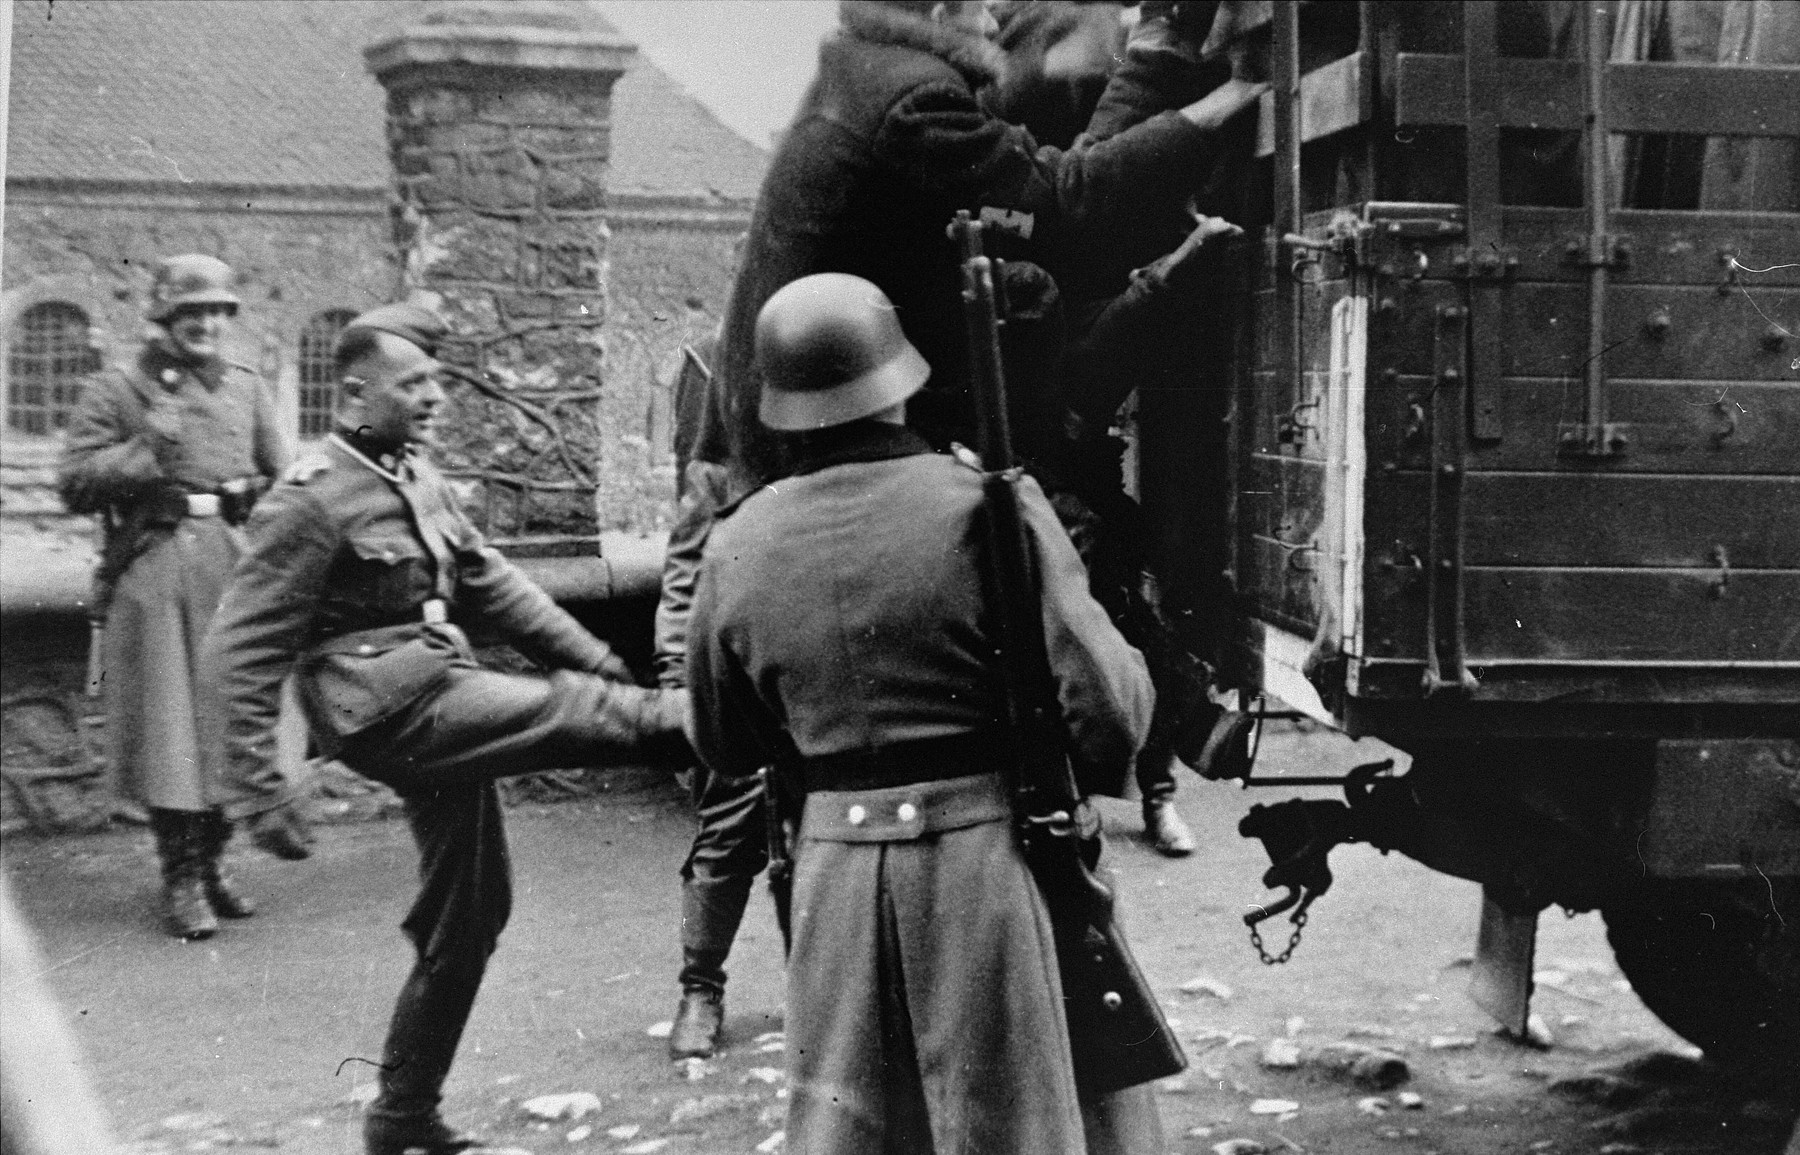 A member of the German police kicks a Jew who is climbing onto the back of a truck during a round-up for forced labor.  Two other Germans look on with derision.